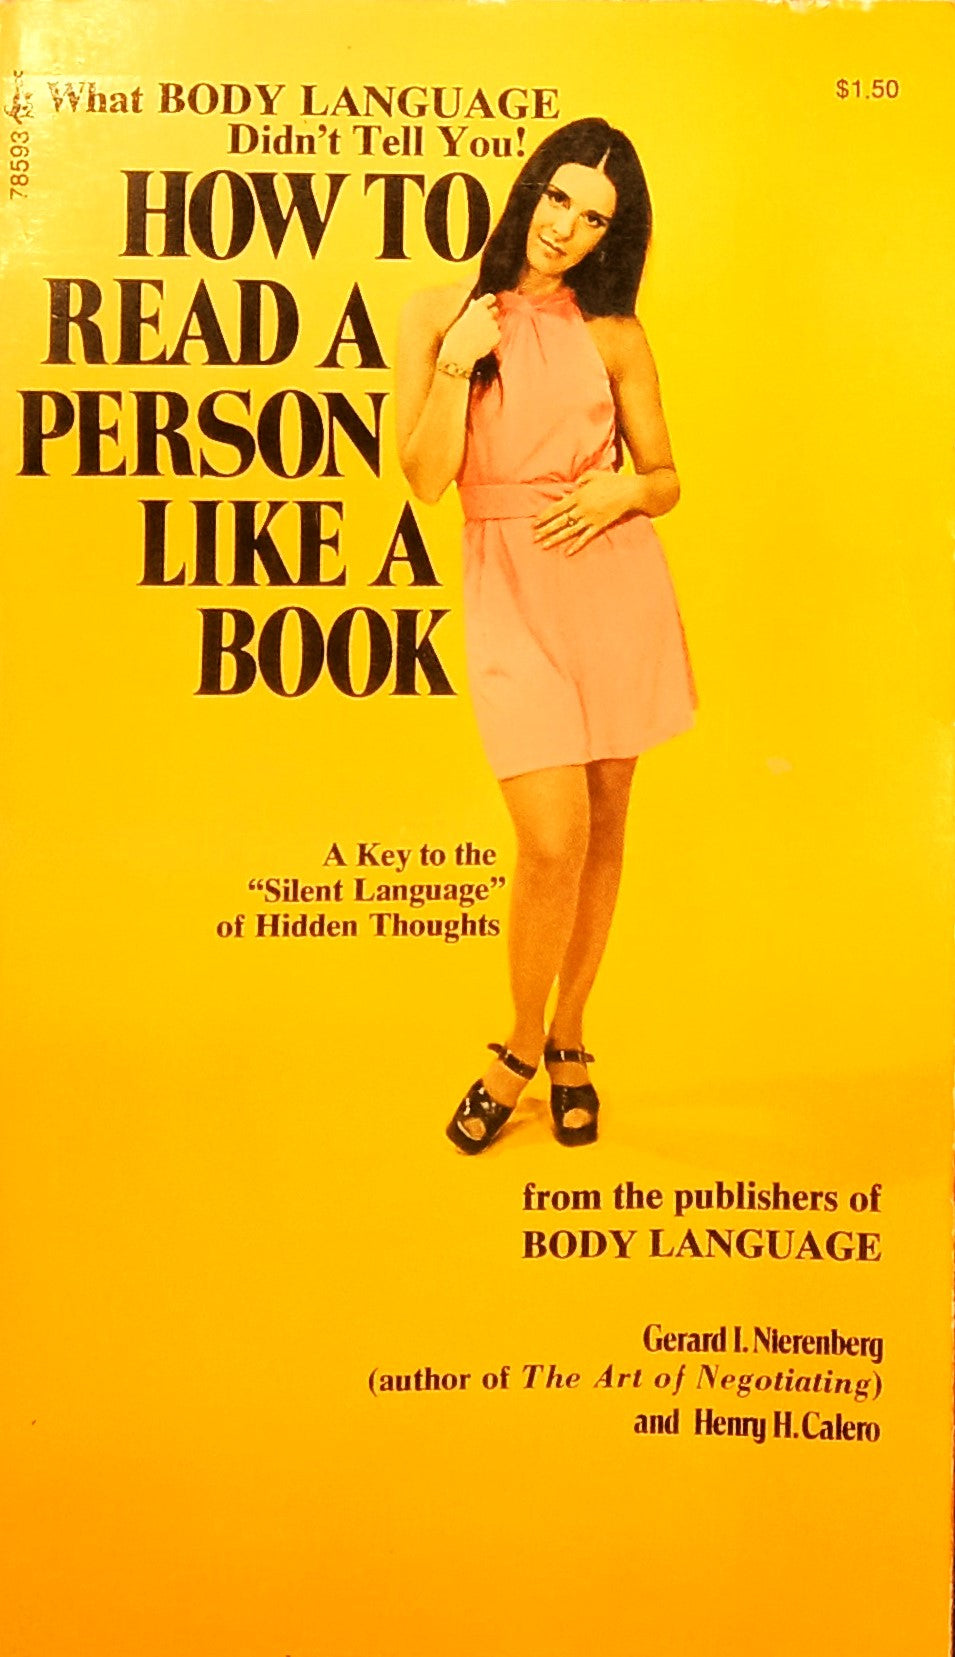 How to Read a Person Like a Book